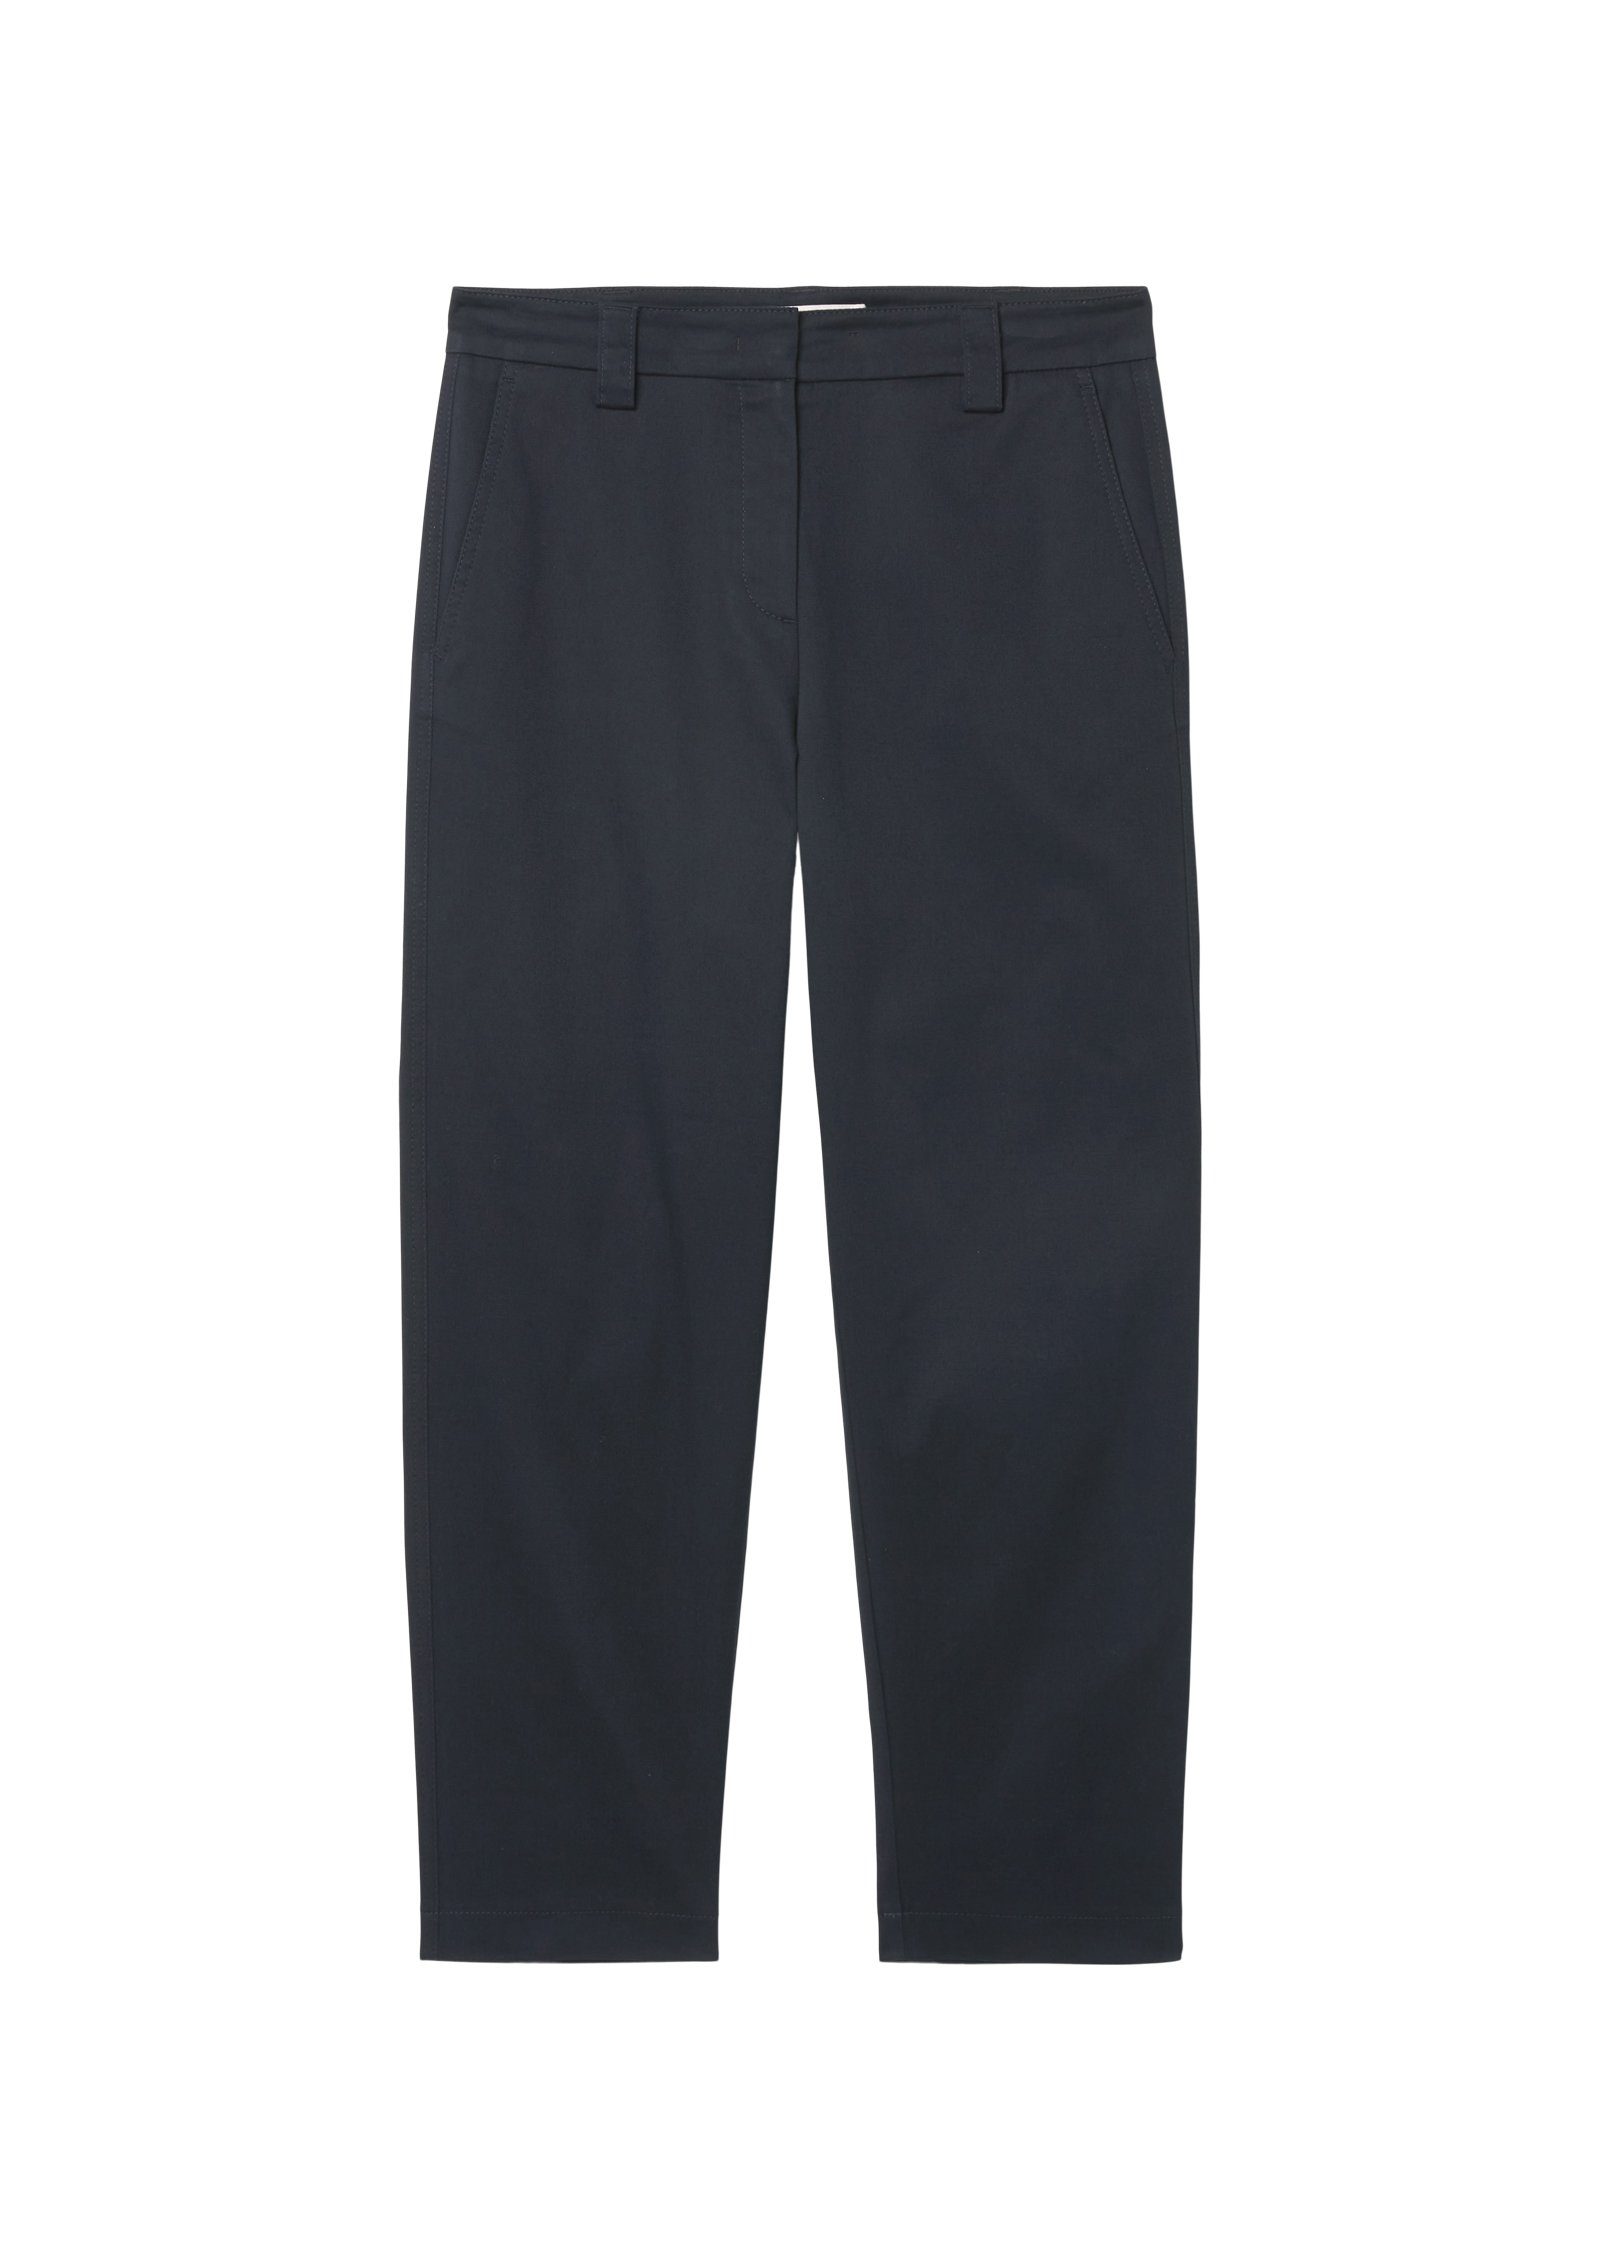 Chino-Style tapered Pants, modern 7/8-Hose im pocket style, modernen high rise, leg, Marc blue welt thunder O'Polo chino